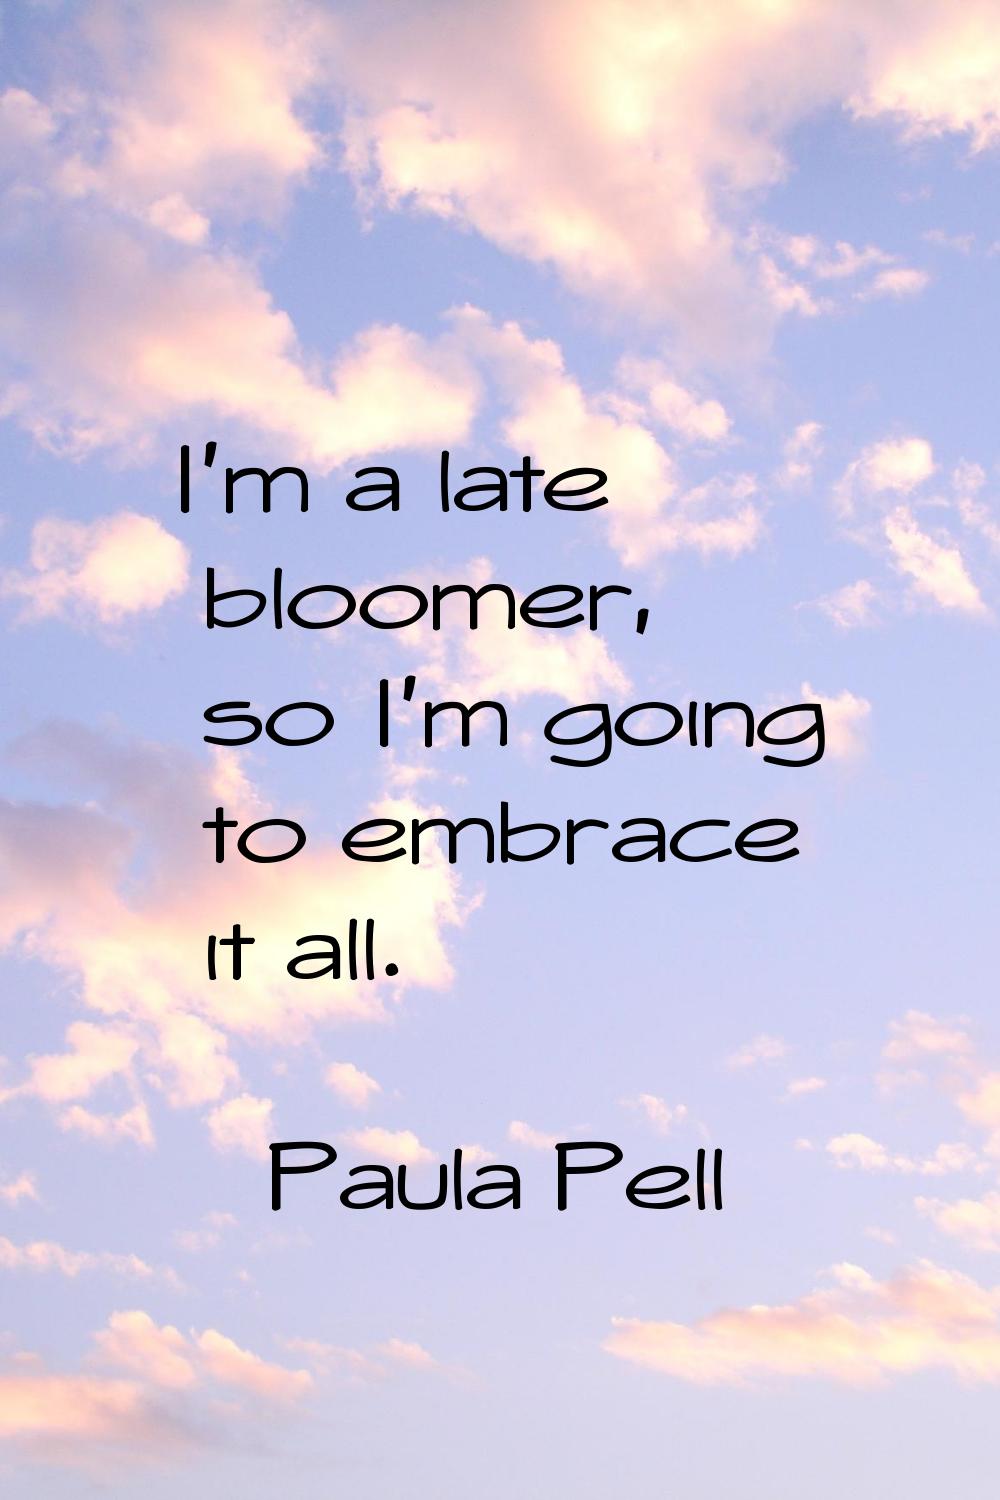 I'm a late bloomer, so I'm going to embrace it all.